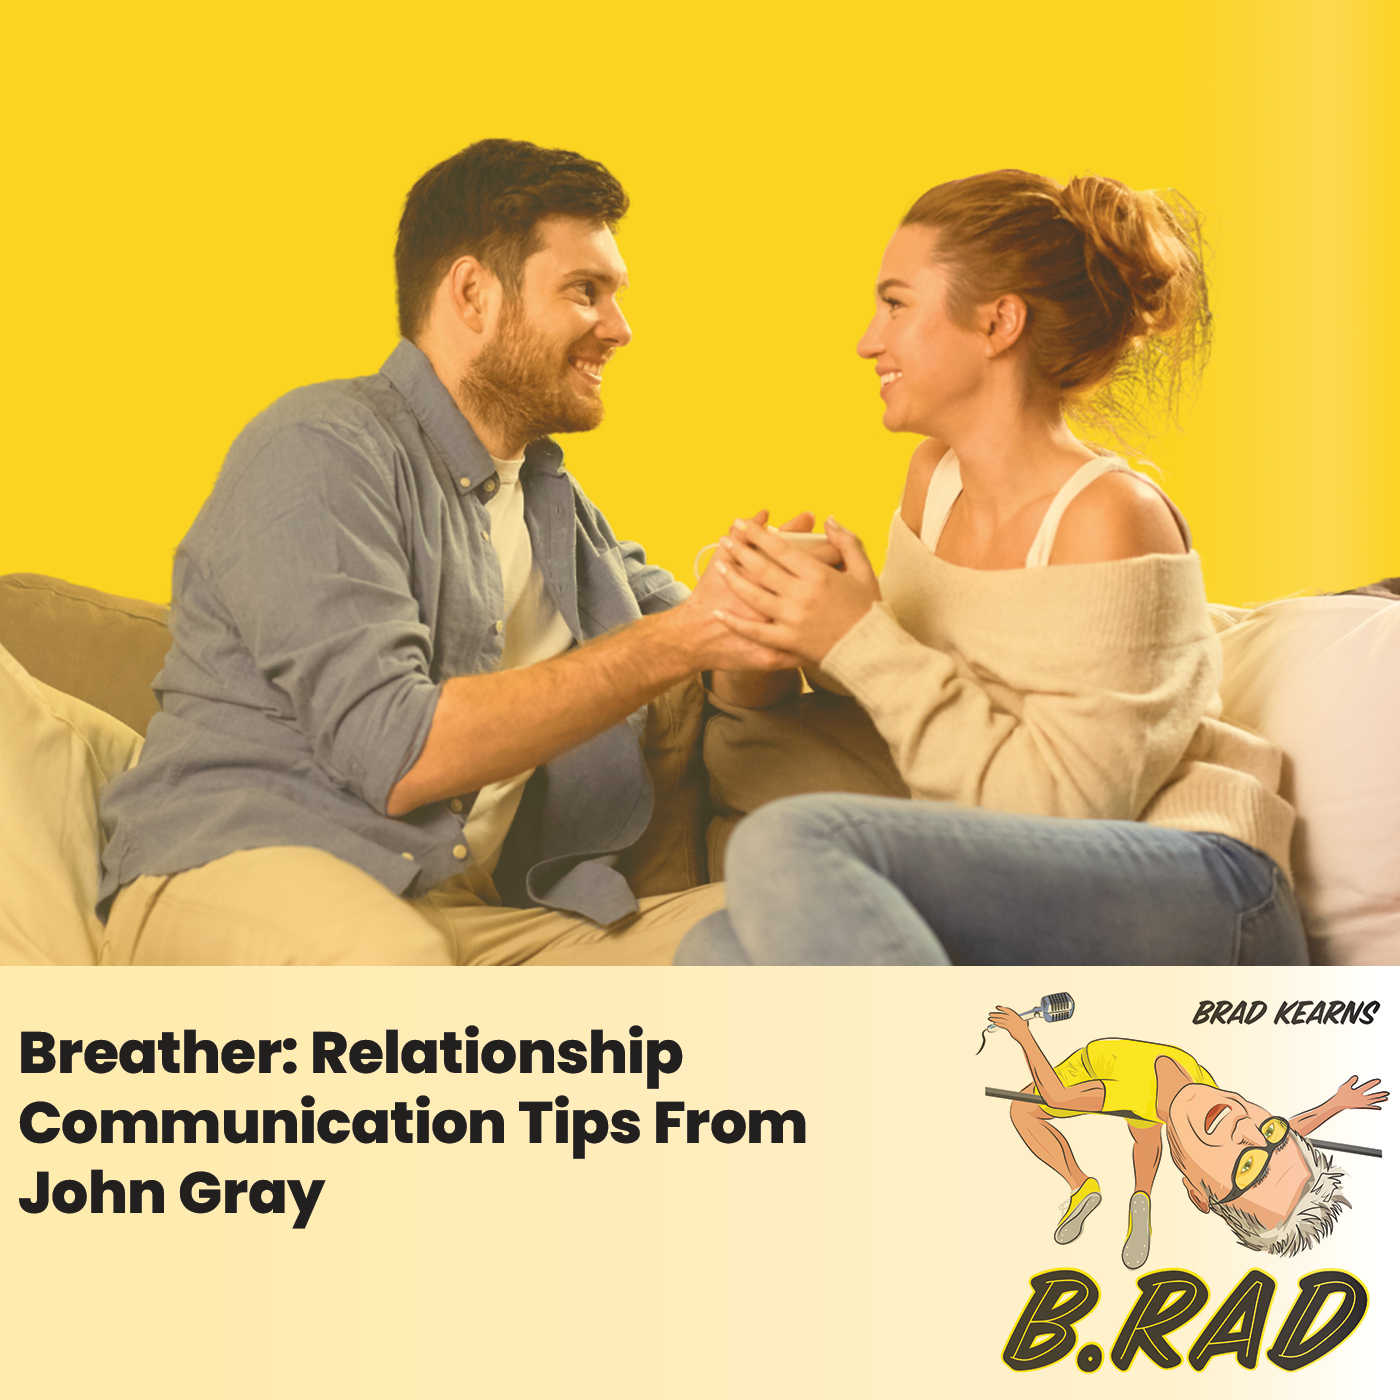 Breather: Relationship Communication Tips From John Gray